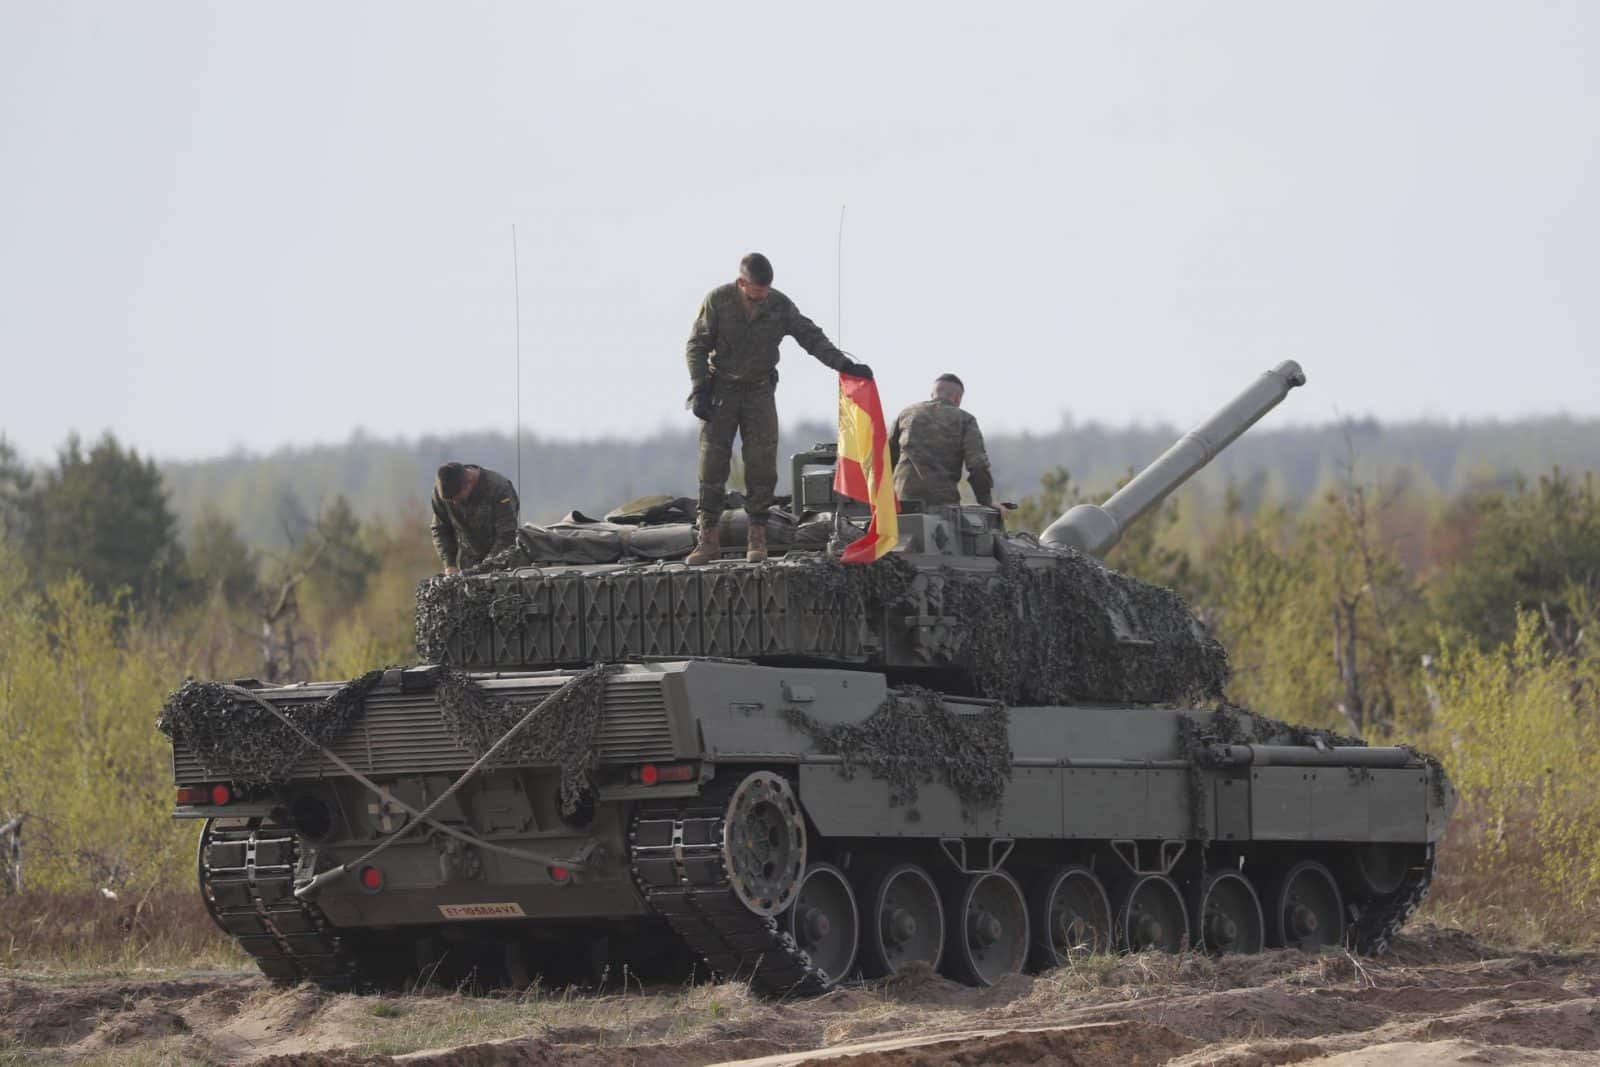 Spain to deliver Leopard tanks and anti-aircraft missile systems to Ukraine